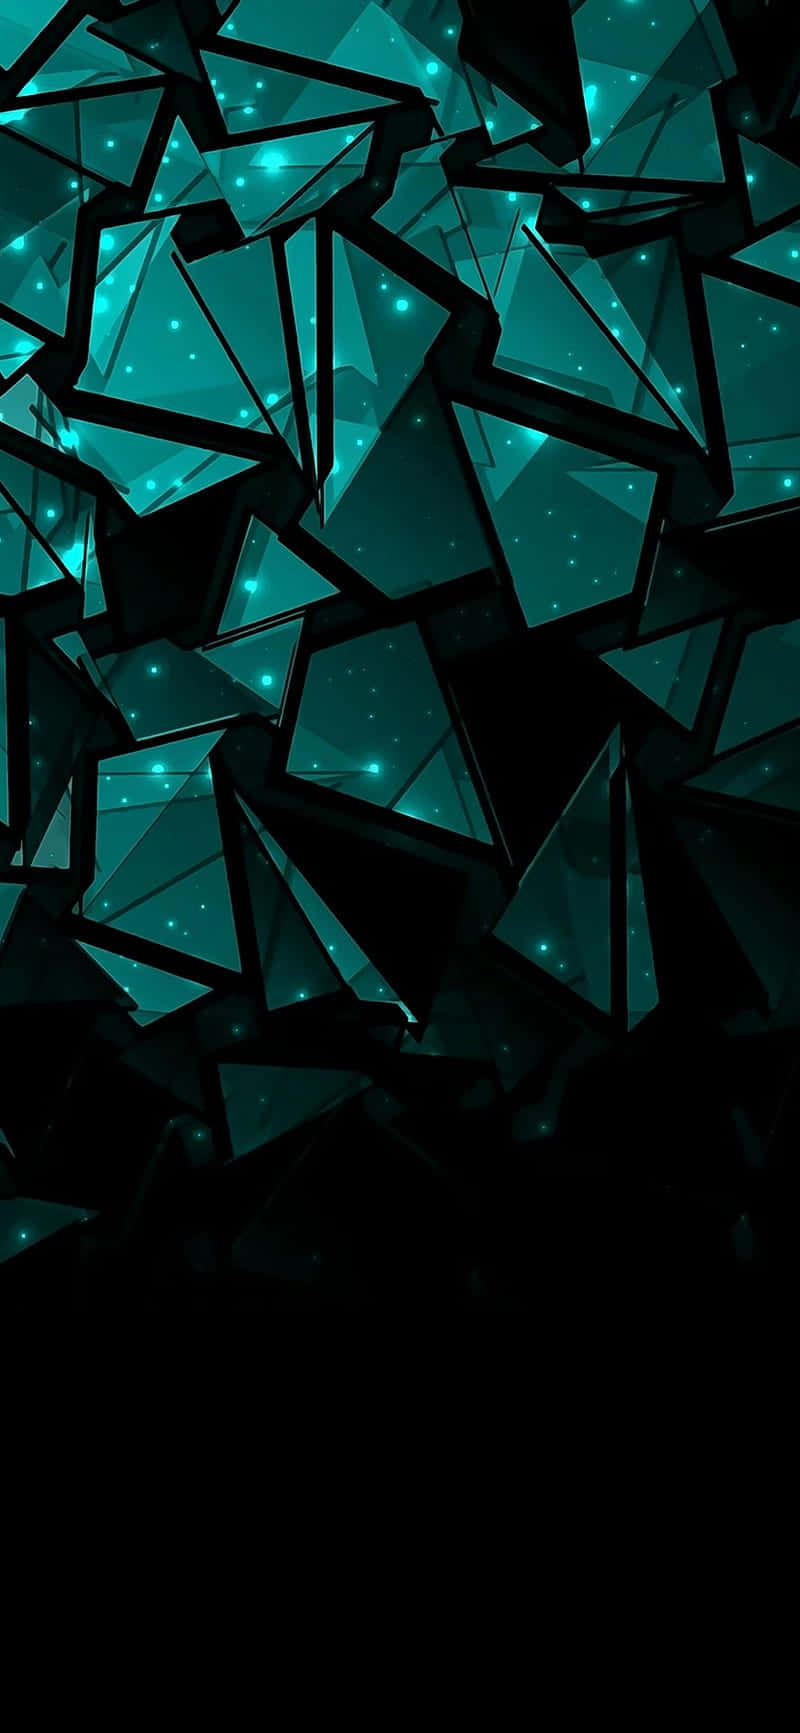 Download Amoled S Abstract Shape Wallpaper 